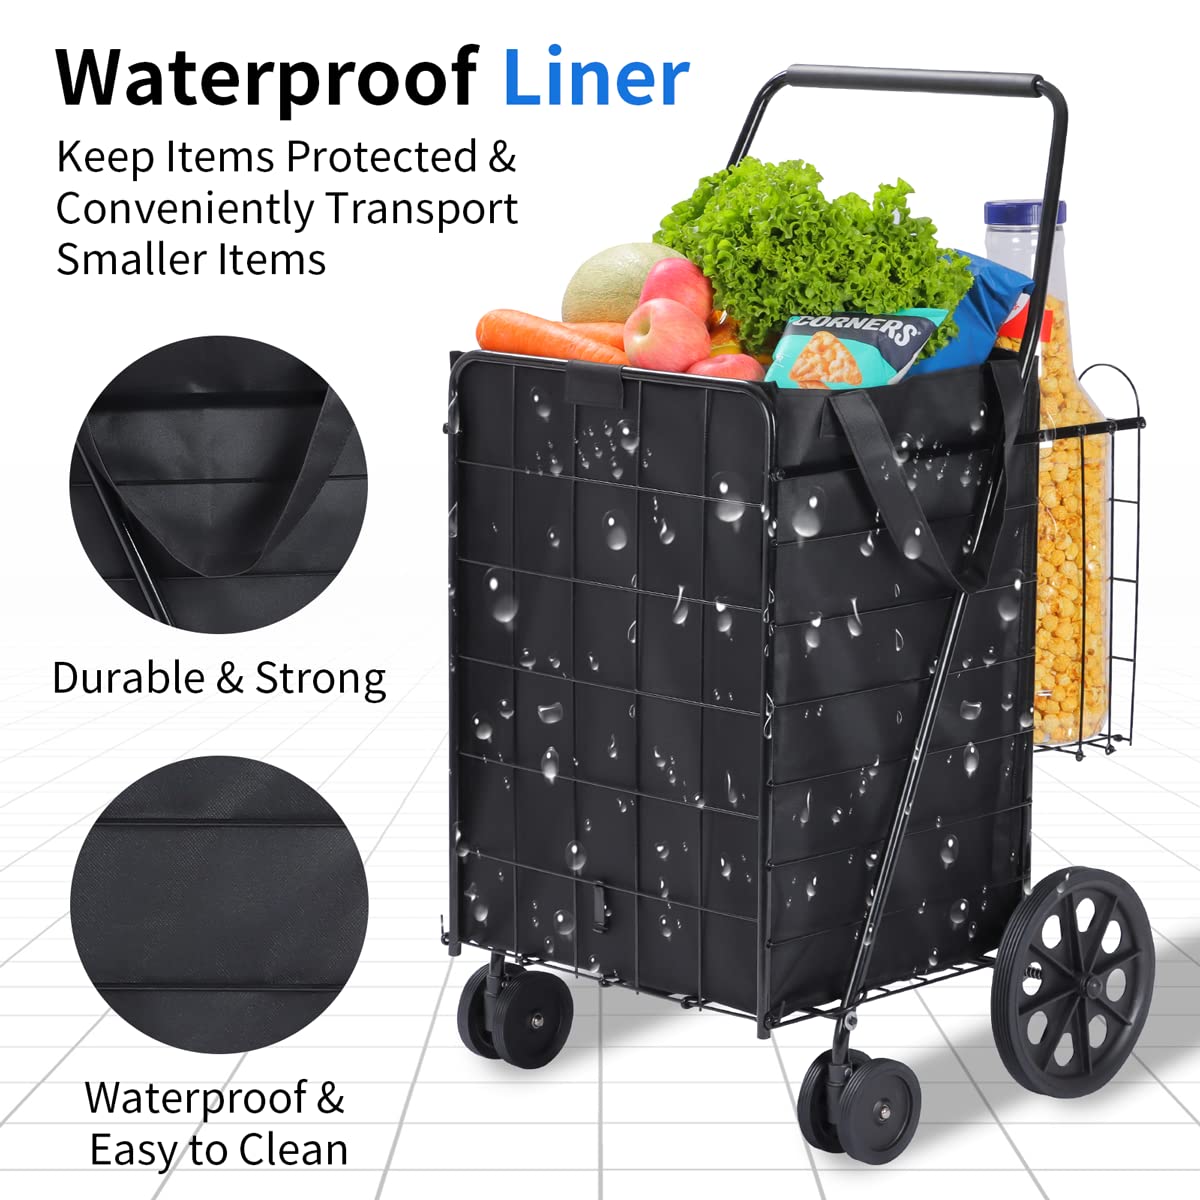 Upgraded Shopping Cart w/ 360° Swivel Wheels & Waterproof Basket Liner for Groceries, Shopping Laundry - Foldable Collapsible & Lightweight - Extra Large Heavy Duty Utility Cart